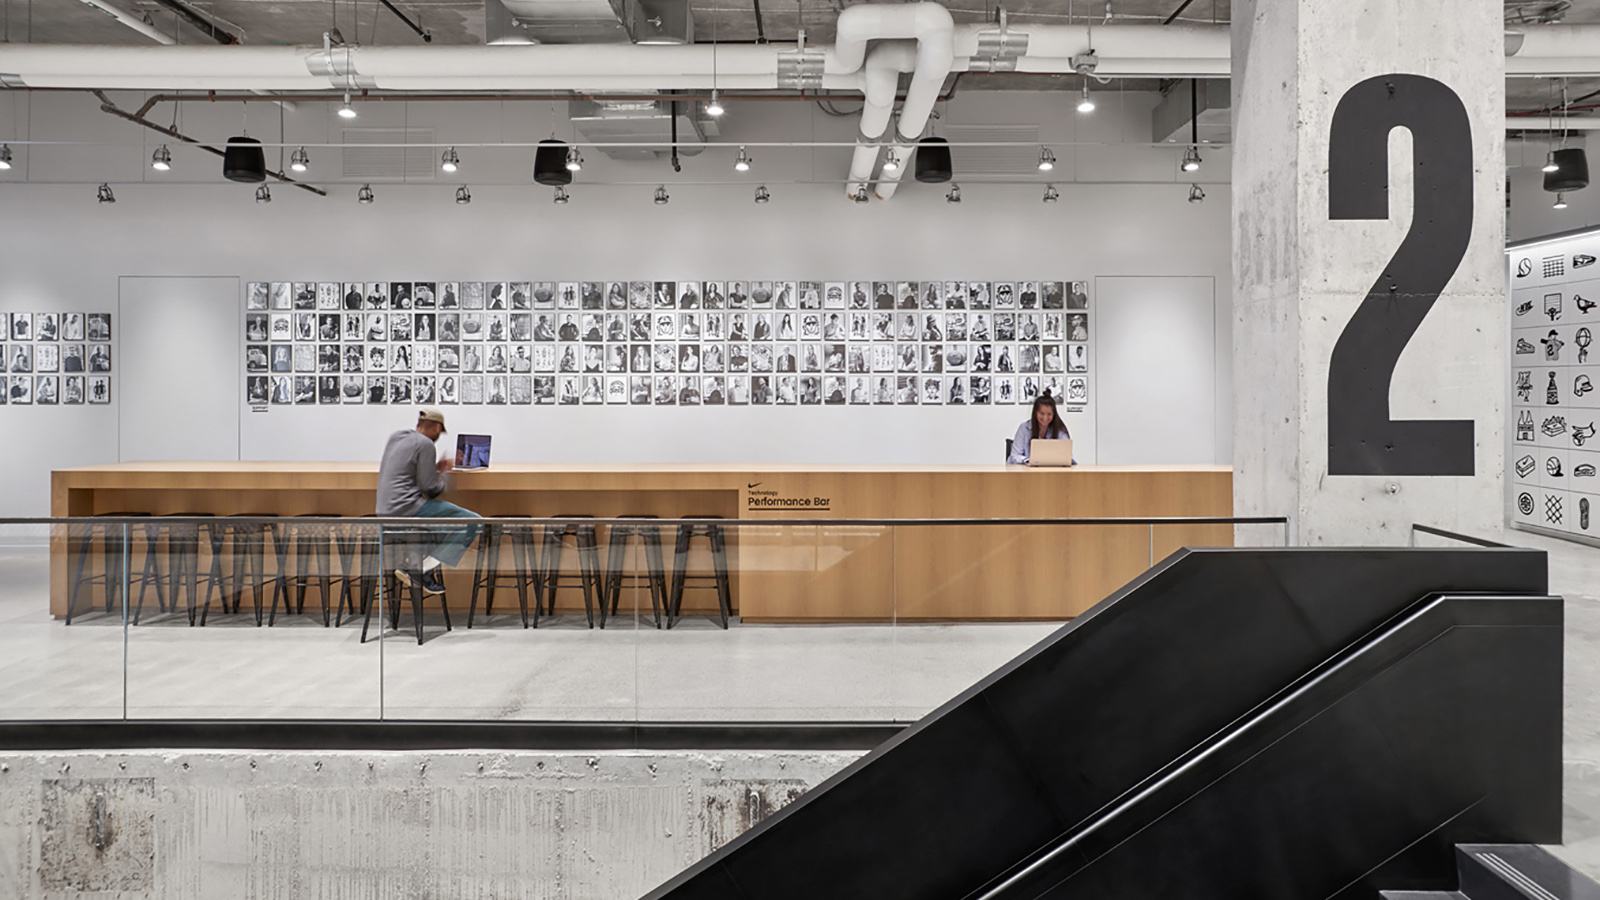 Nike Nyc Headquarters Interior, performance bar where employees can work.